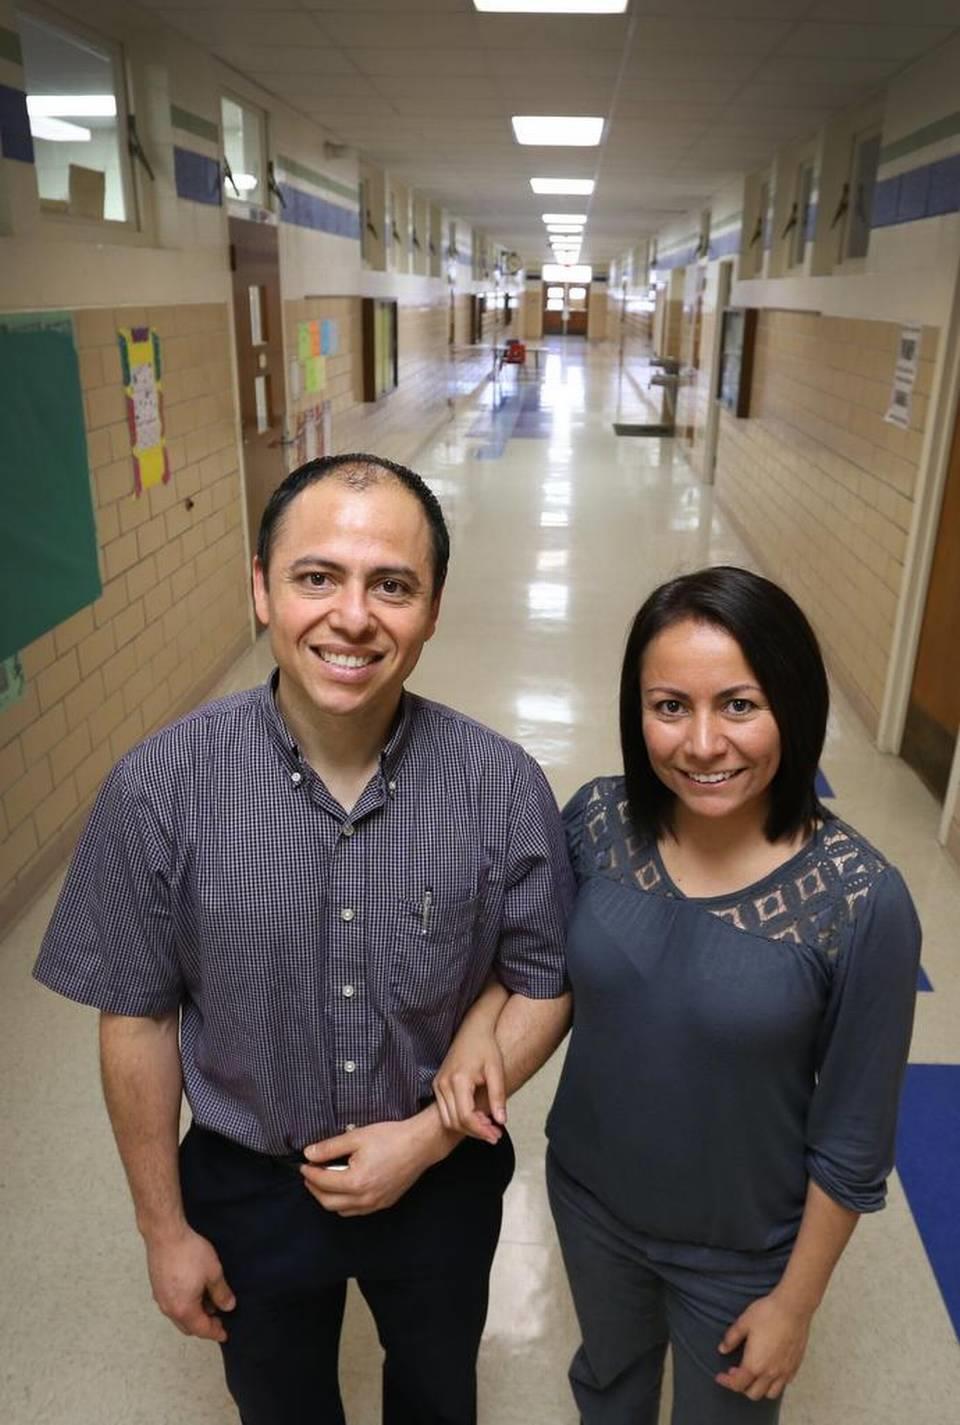 Mario and Maria Razo where named Teachers of the Year in 2015. They both work at different schools.